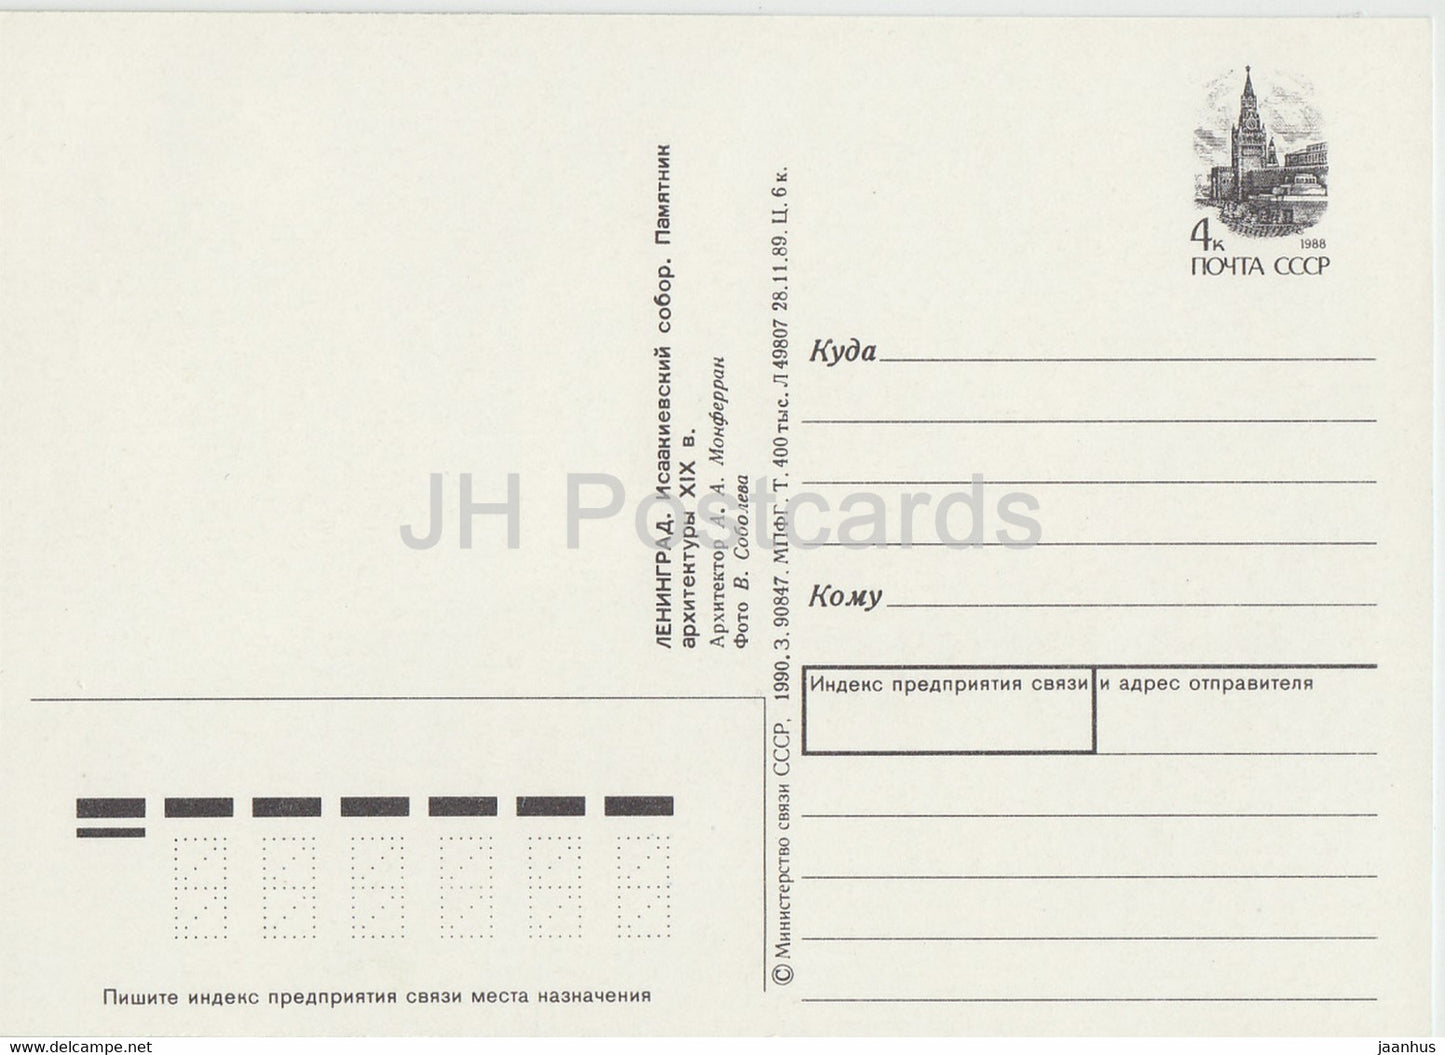 Leningrad - St Petersburg - St Isaac's Cathedral - postal stationery - 1990 - Russia USSR - unused